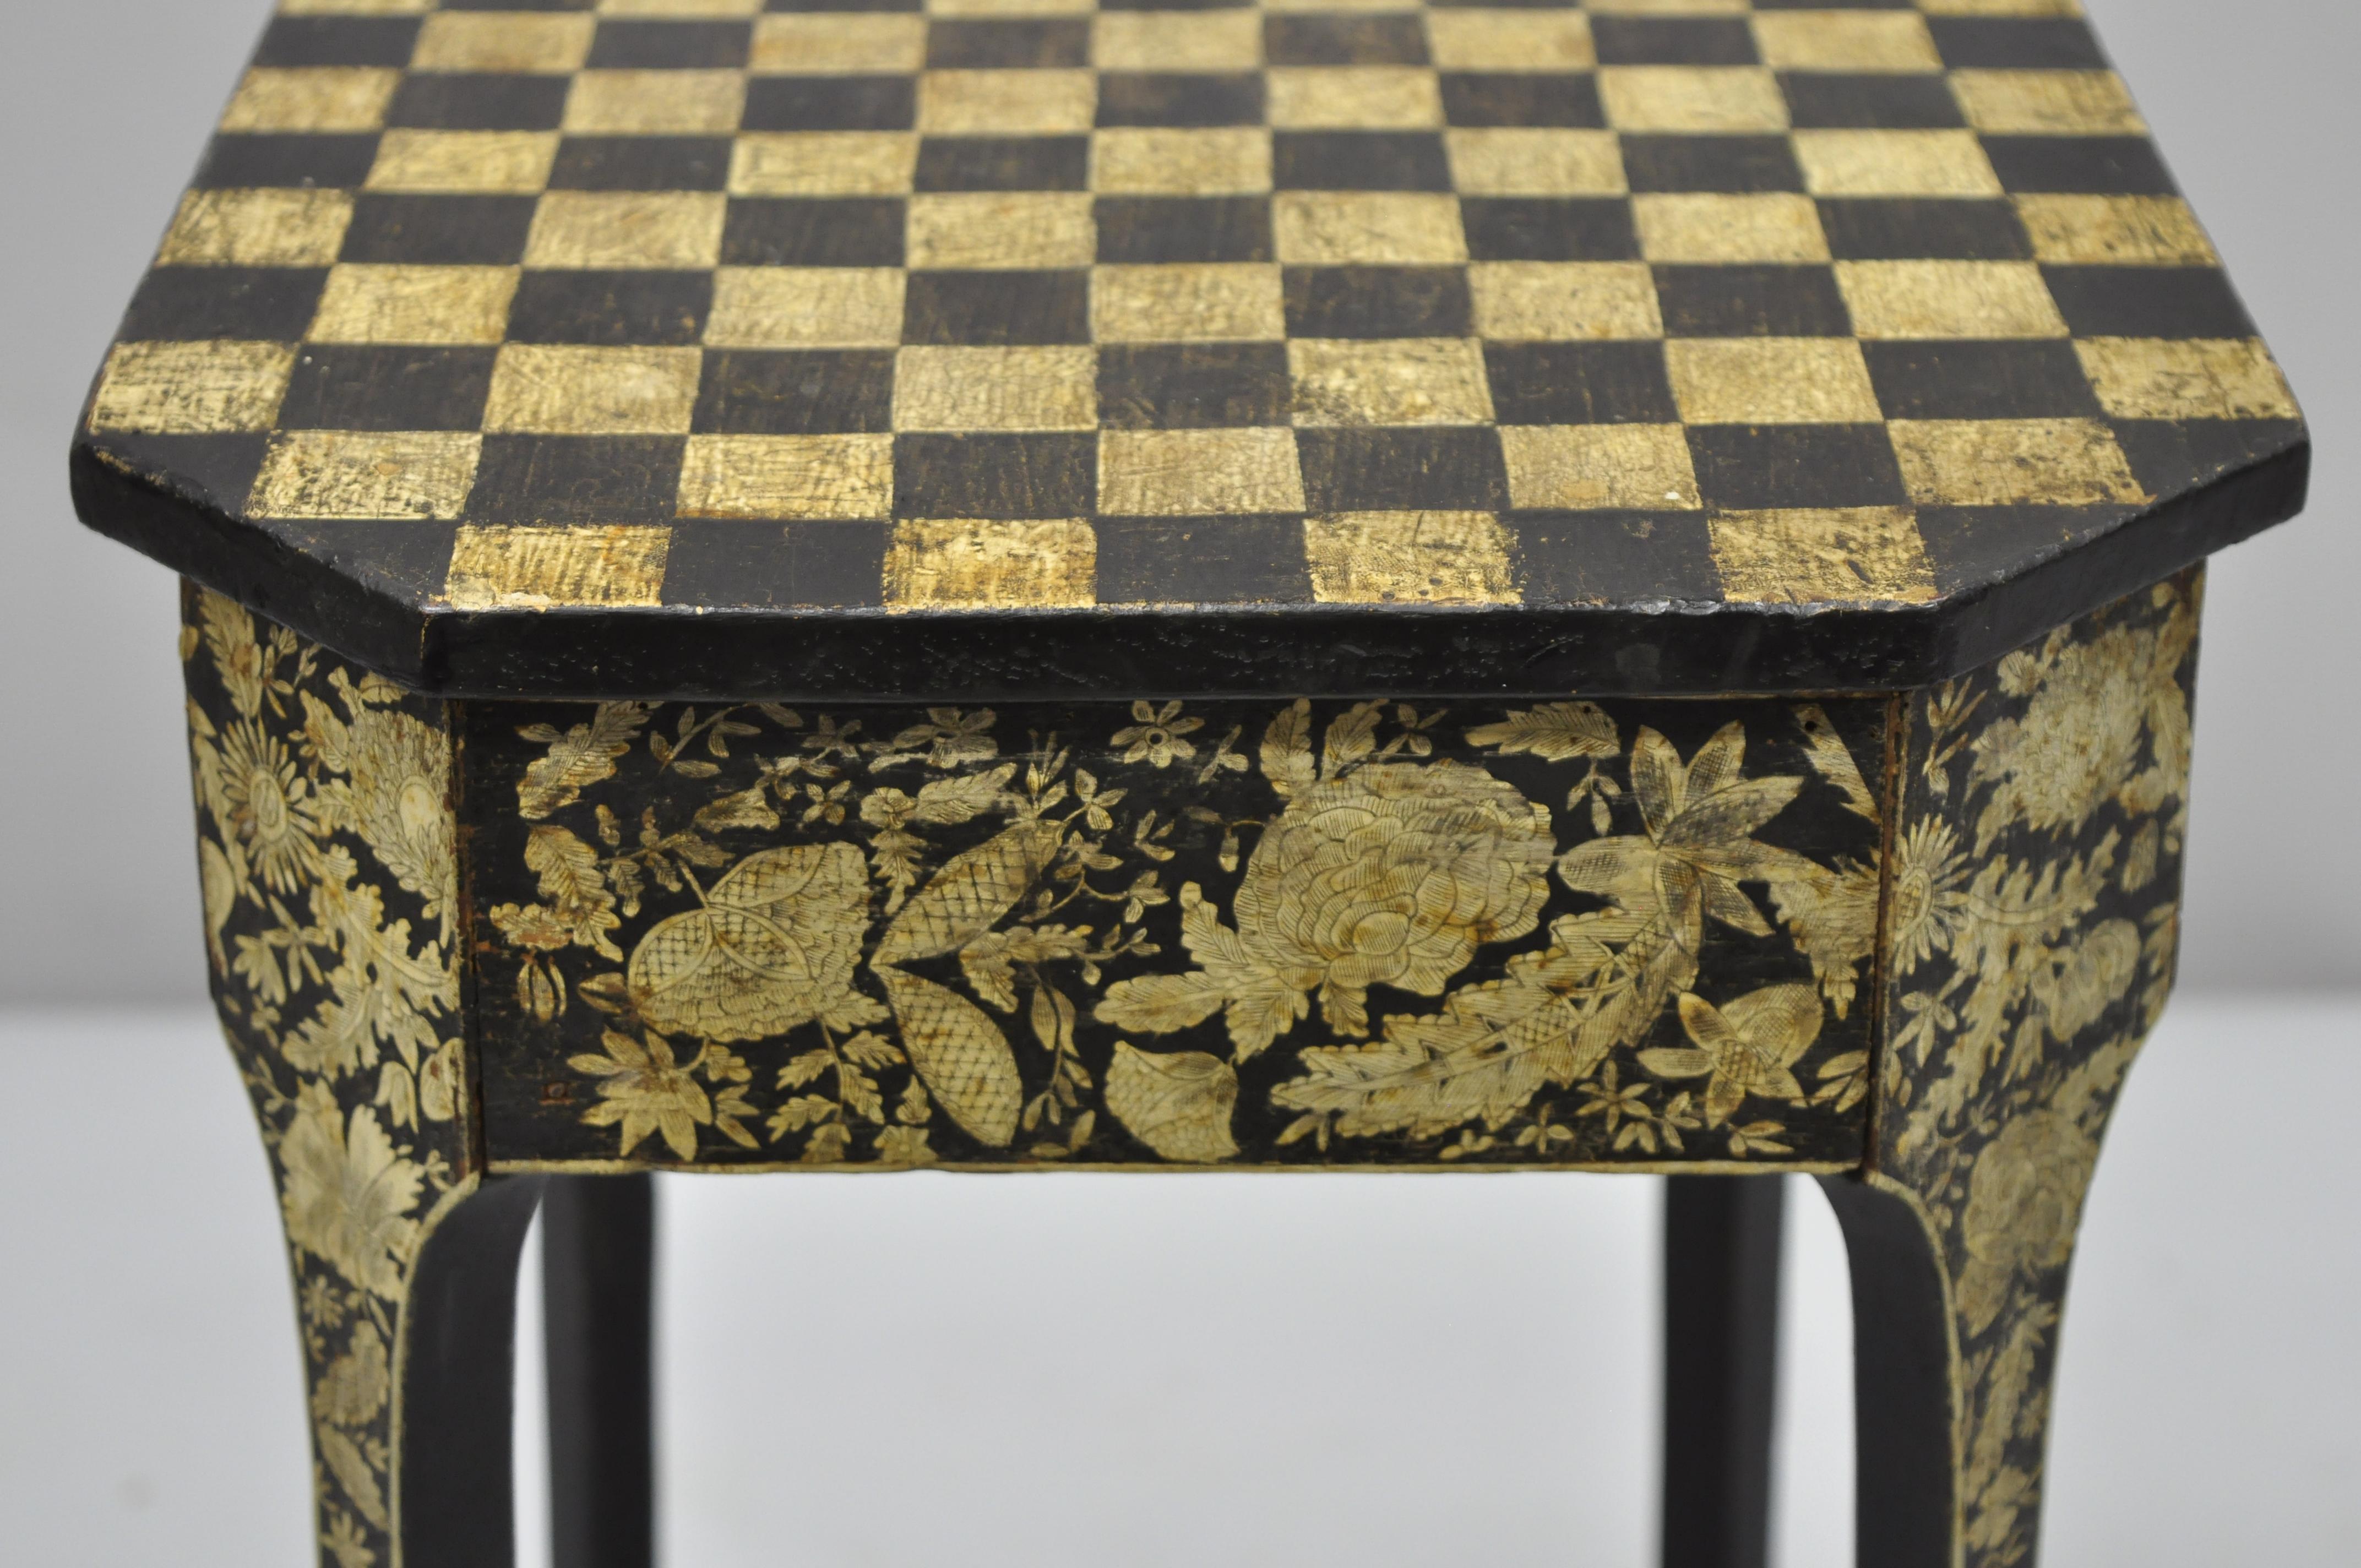 Aesthetic Movement 19th C. Hand Painted Black and Cream Checkerboard Victorian Accent Side Table